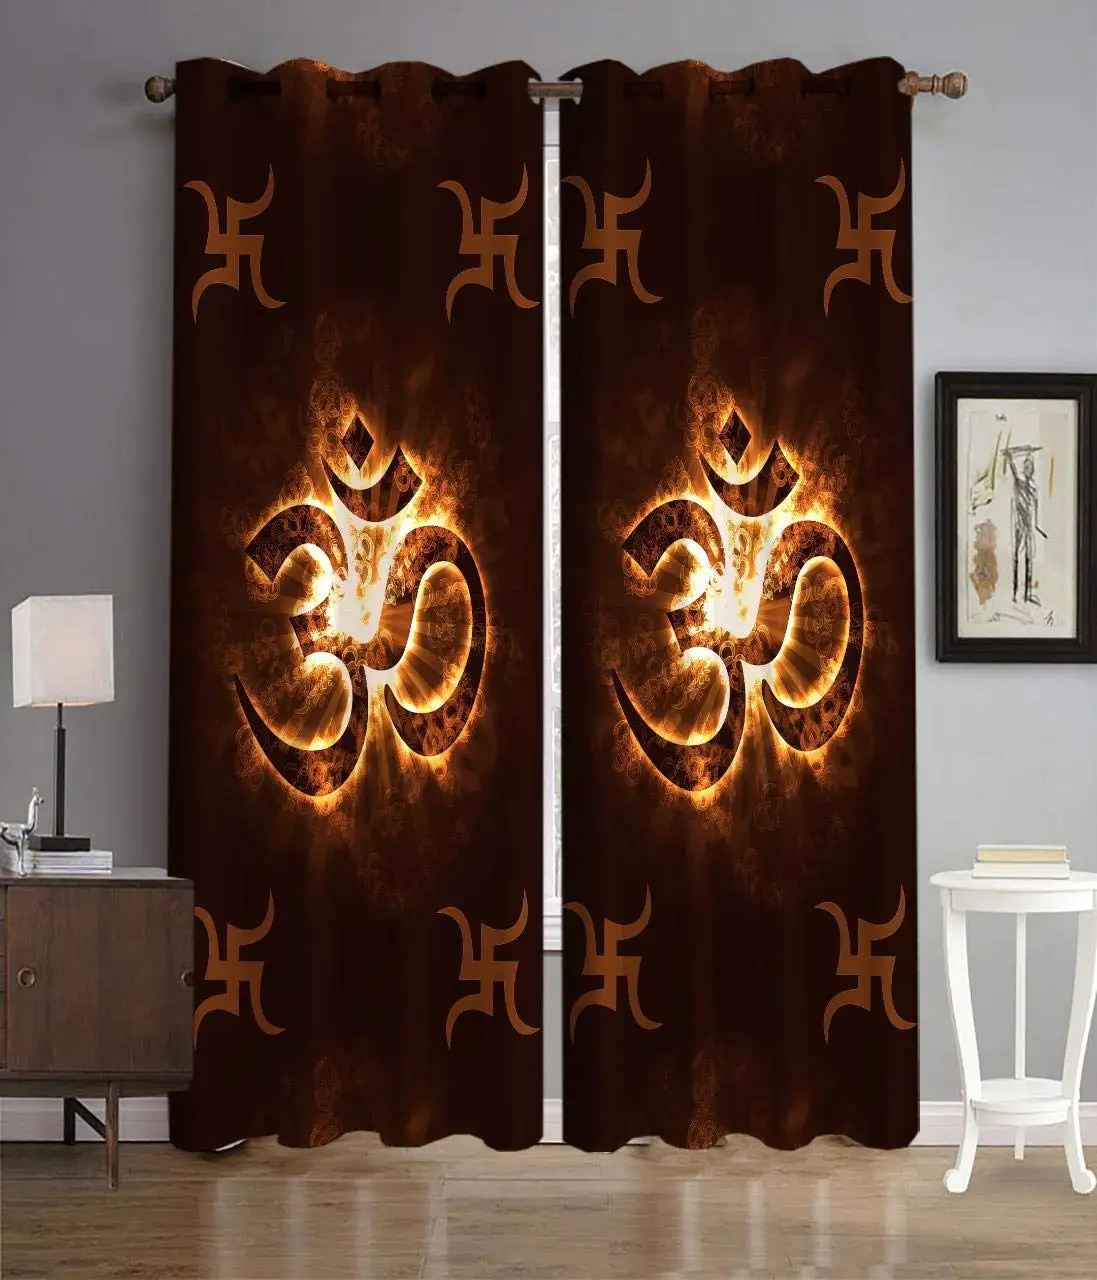 

3D God Digital Printed Home Furnishing Polyresin Curtains for Indian Festival Bedroom Living Room Window Curtains 2 Panels